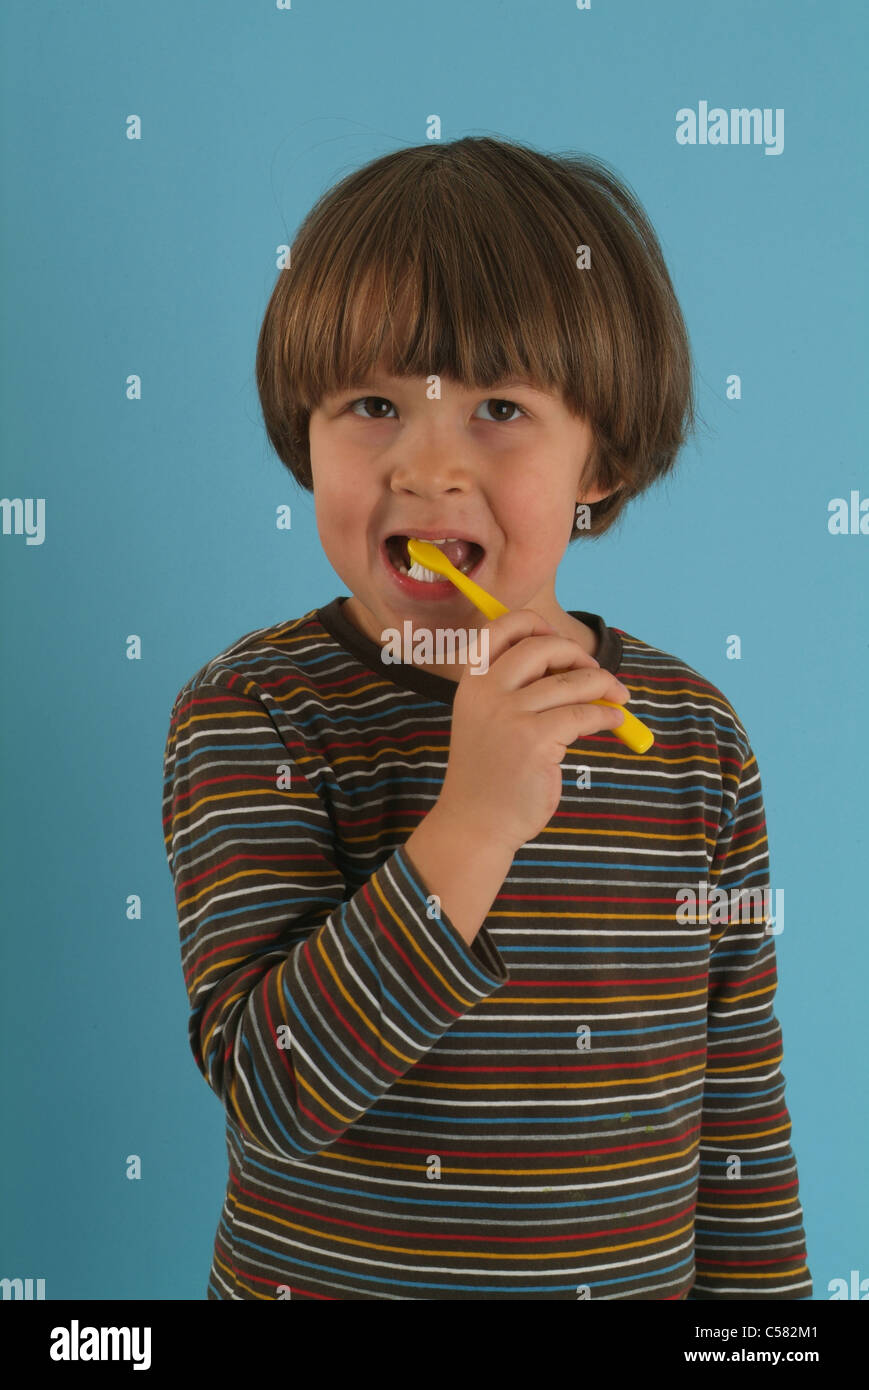 Child, boy, 5, brown-haired, dental cleaning Stock Photo